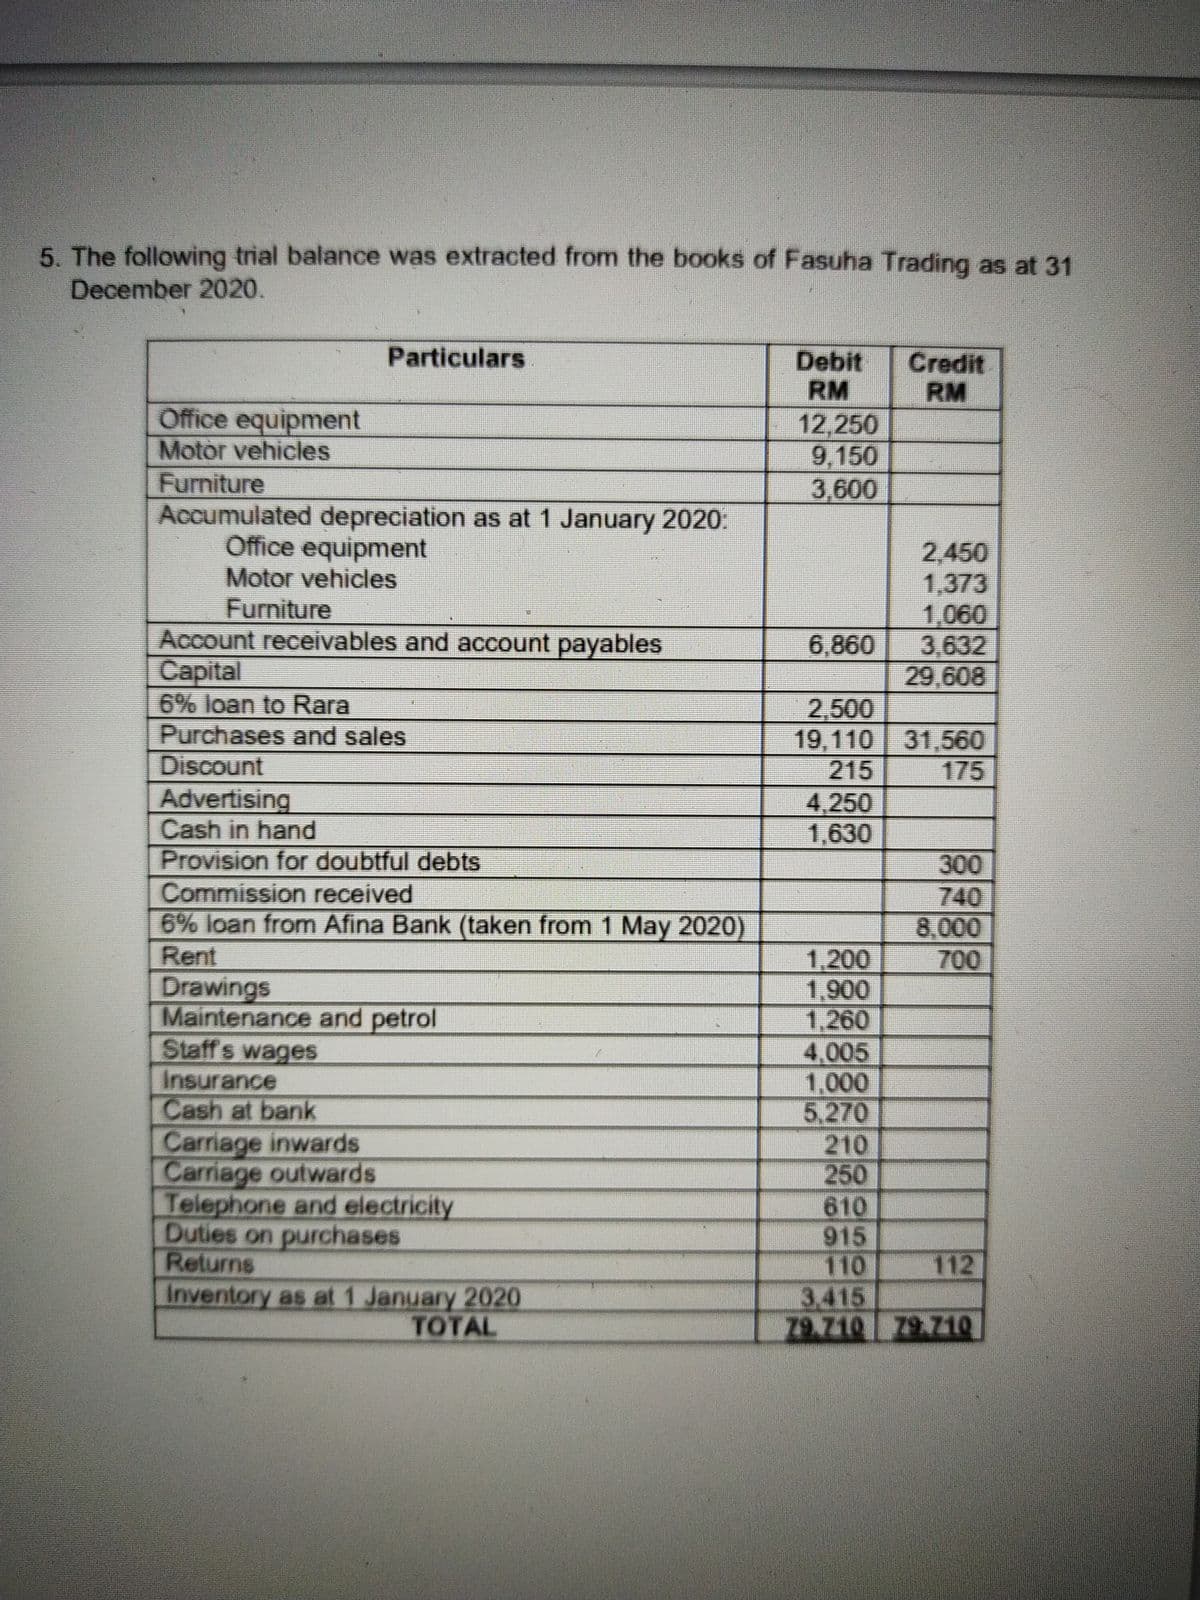 5. The following trial balance was extracted from the books of Fasuha Trading as at 31
December 2020.
Particulars
Debit
RM
Credit
RM
Office equipment
Motor vehicles
Furniture
Accumulated depreciation as at 1 January 2020:
Office equipment
12,250
9,150
3,600
2,450
1,373
1,060
3,632
29,608
Motor vehicles
Furniture
Account receivables and account payables
Сaptal
6% loan to Rara
Purchases and sales
Discount
6,860
2,500
19,110 31,560
215
175
Advertising
Cash in hand
Provision for doubtful debts
4,250
1,630
300
740
8,000
700
Commission received
6% loan from Afina Bank (taken from 1 May 2020)
Rent
Drawings
Maintenance and petrol
Staffs wages
Insurance
Cash at bank
Carriage inwards
Carriage outwards
Telephone and electricity
Duties on purchases
Returns
Inventory as at 1 January 2020
1,200
1,900
1,260
4,005
1,000
5.270
210
250
610
915
110
3.415
79.710 79.710
112
TOTAL
